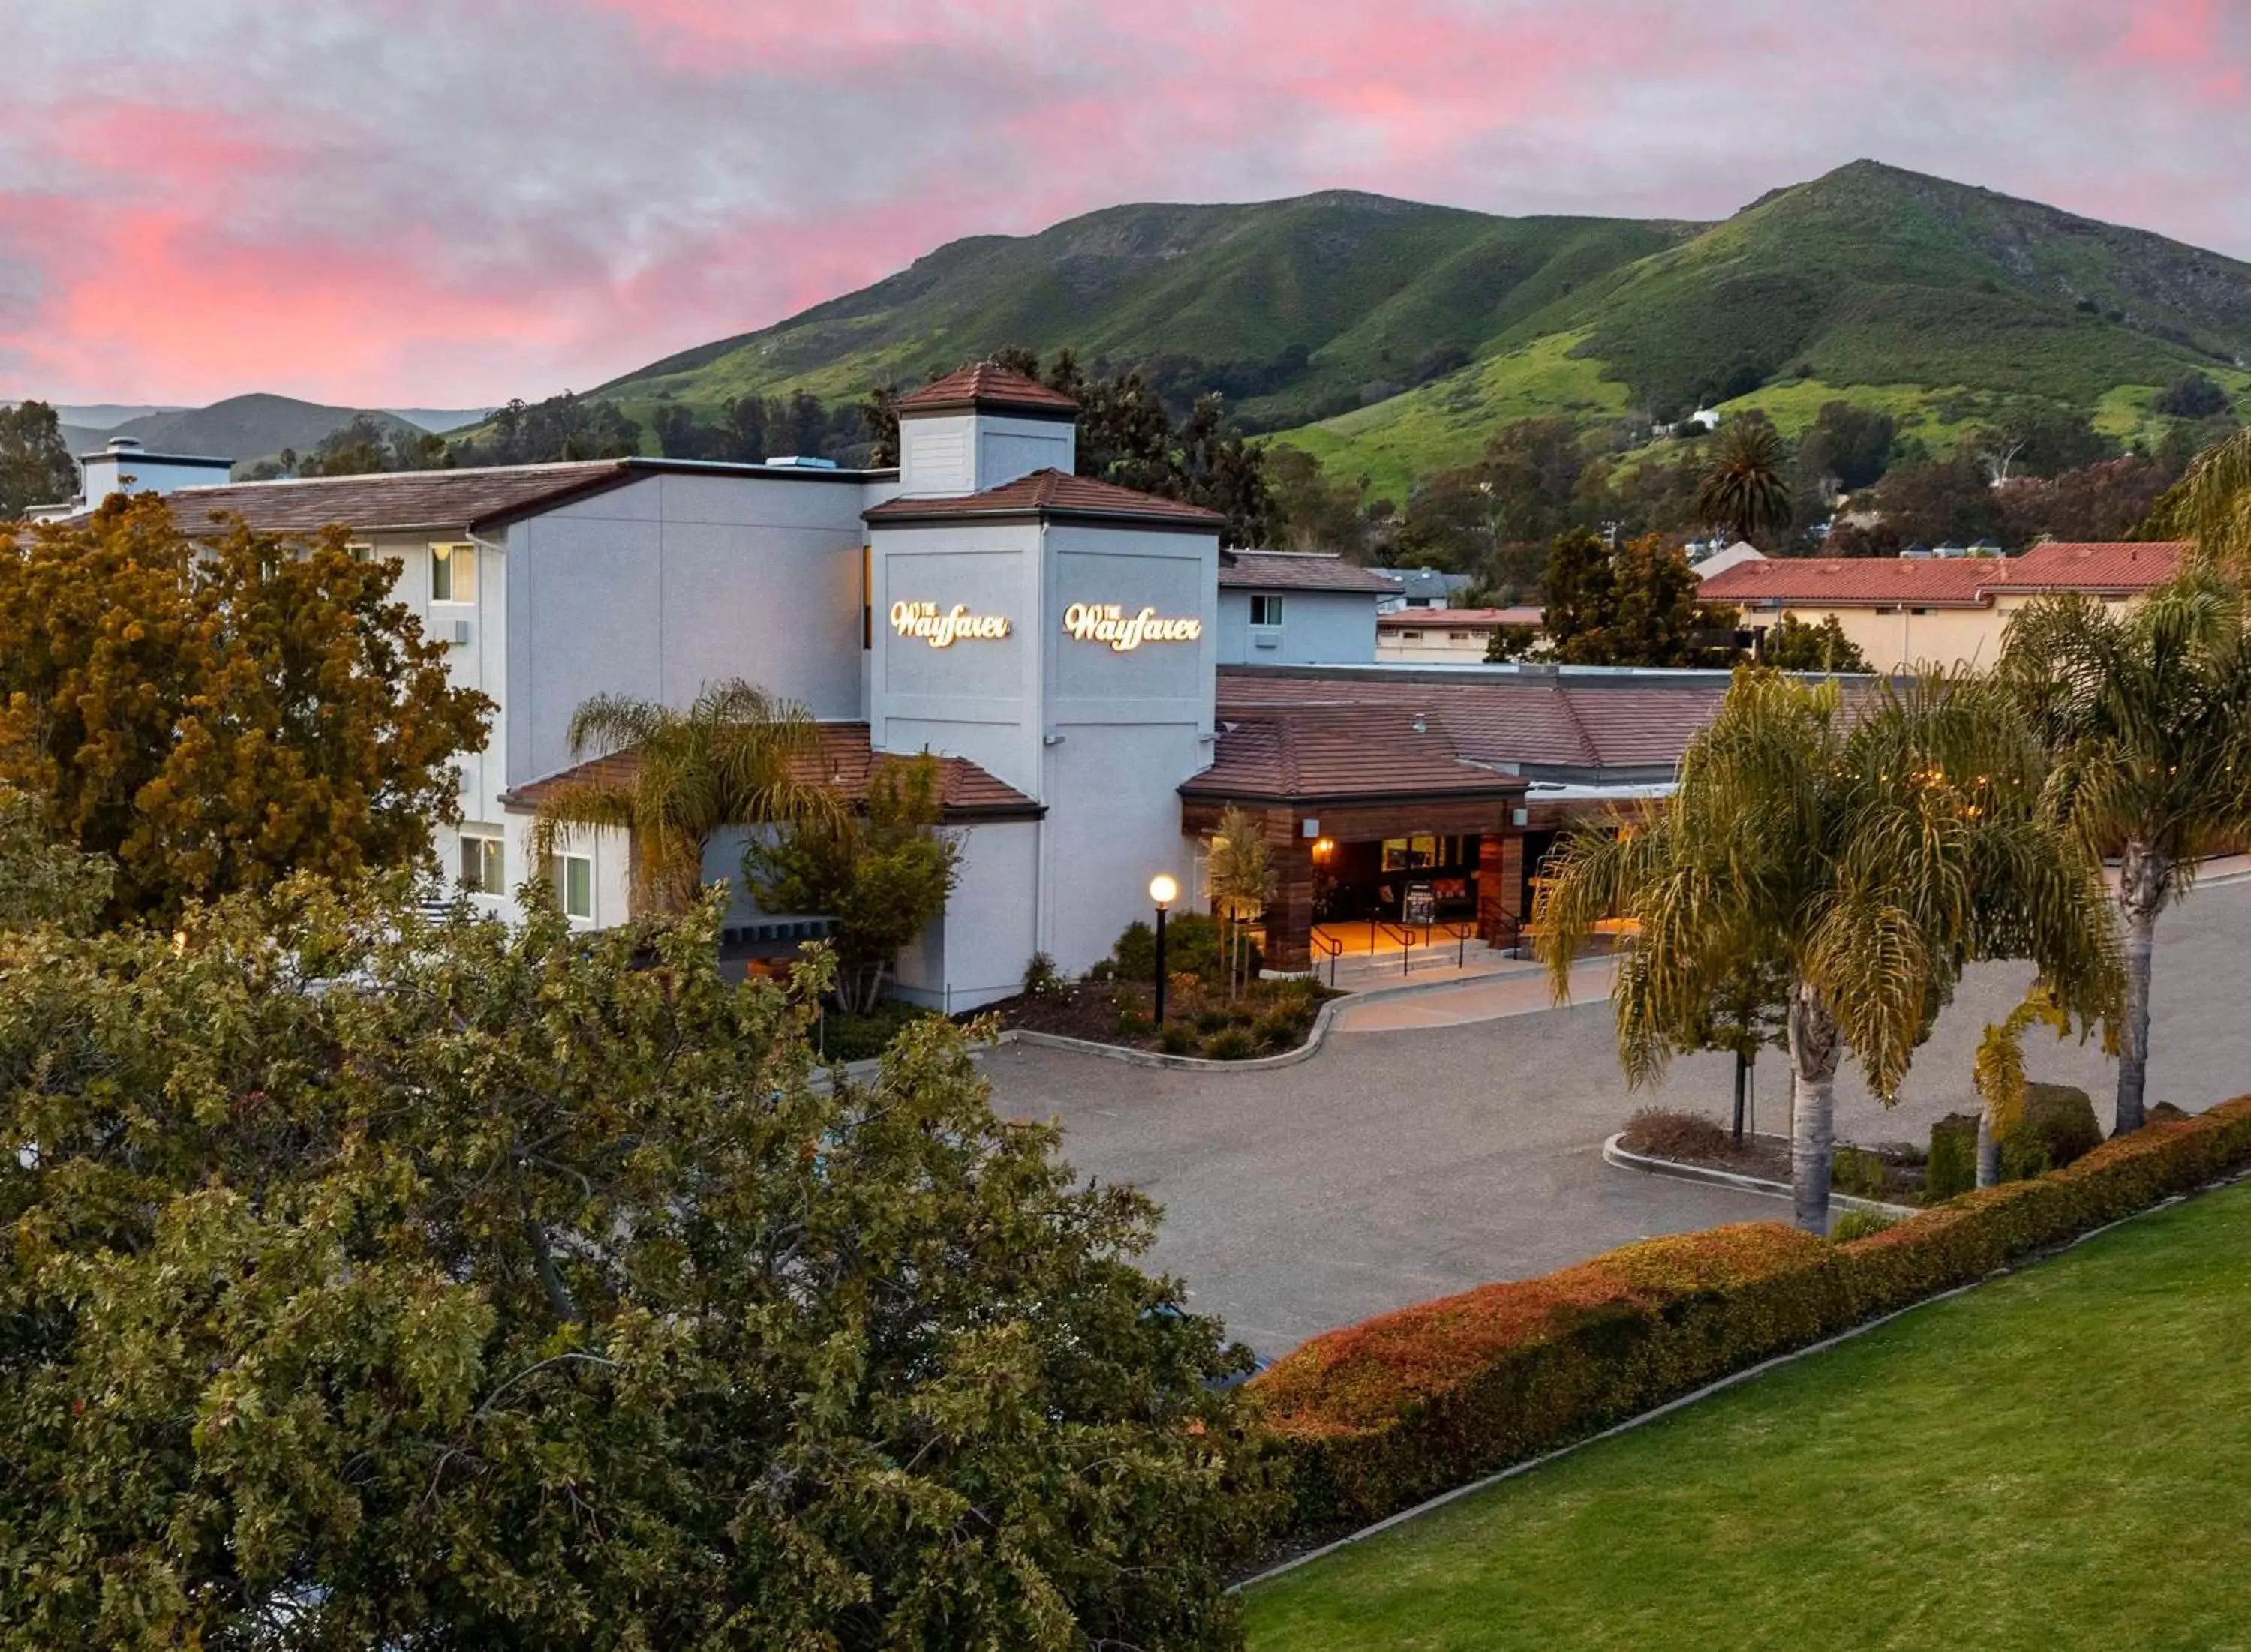 Property building in The Wayfarer San Luis Obispo, Tapestry Collection by Hilton